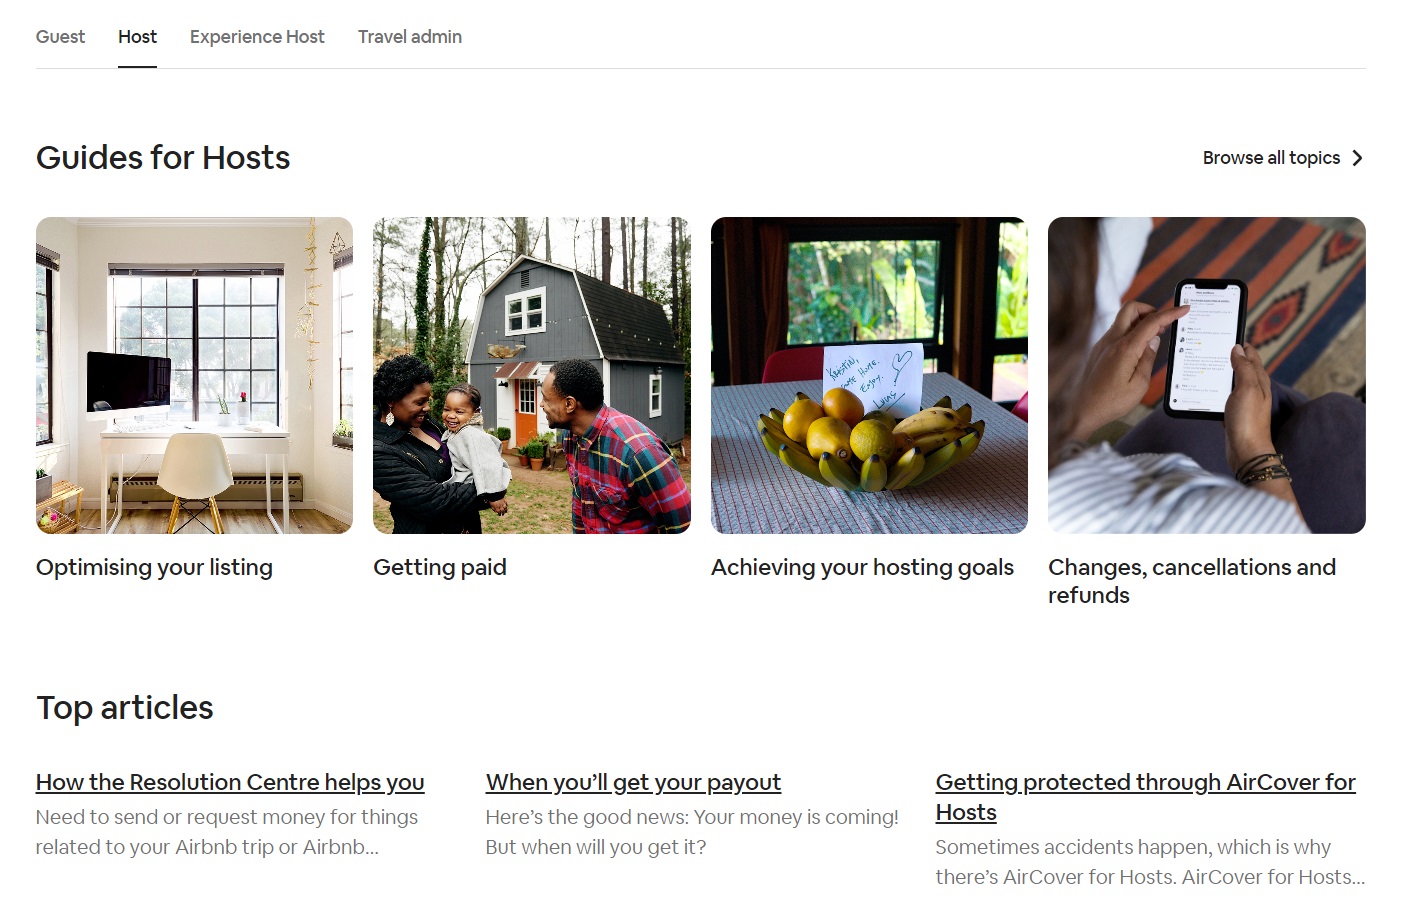 A view of Airbnb’s help center guides for hosts.